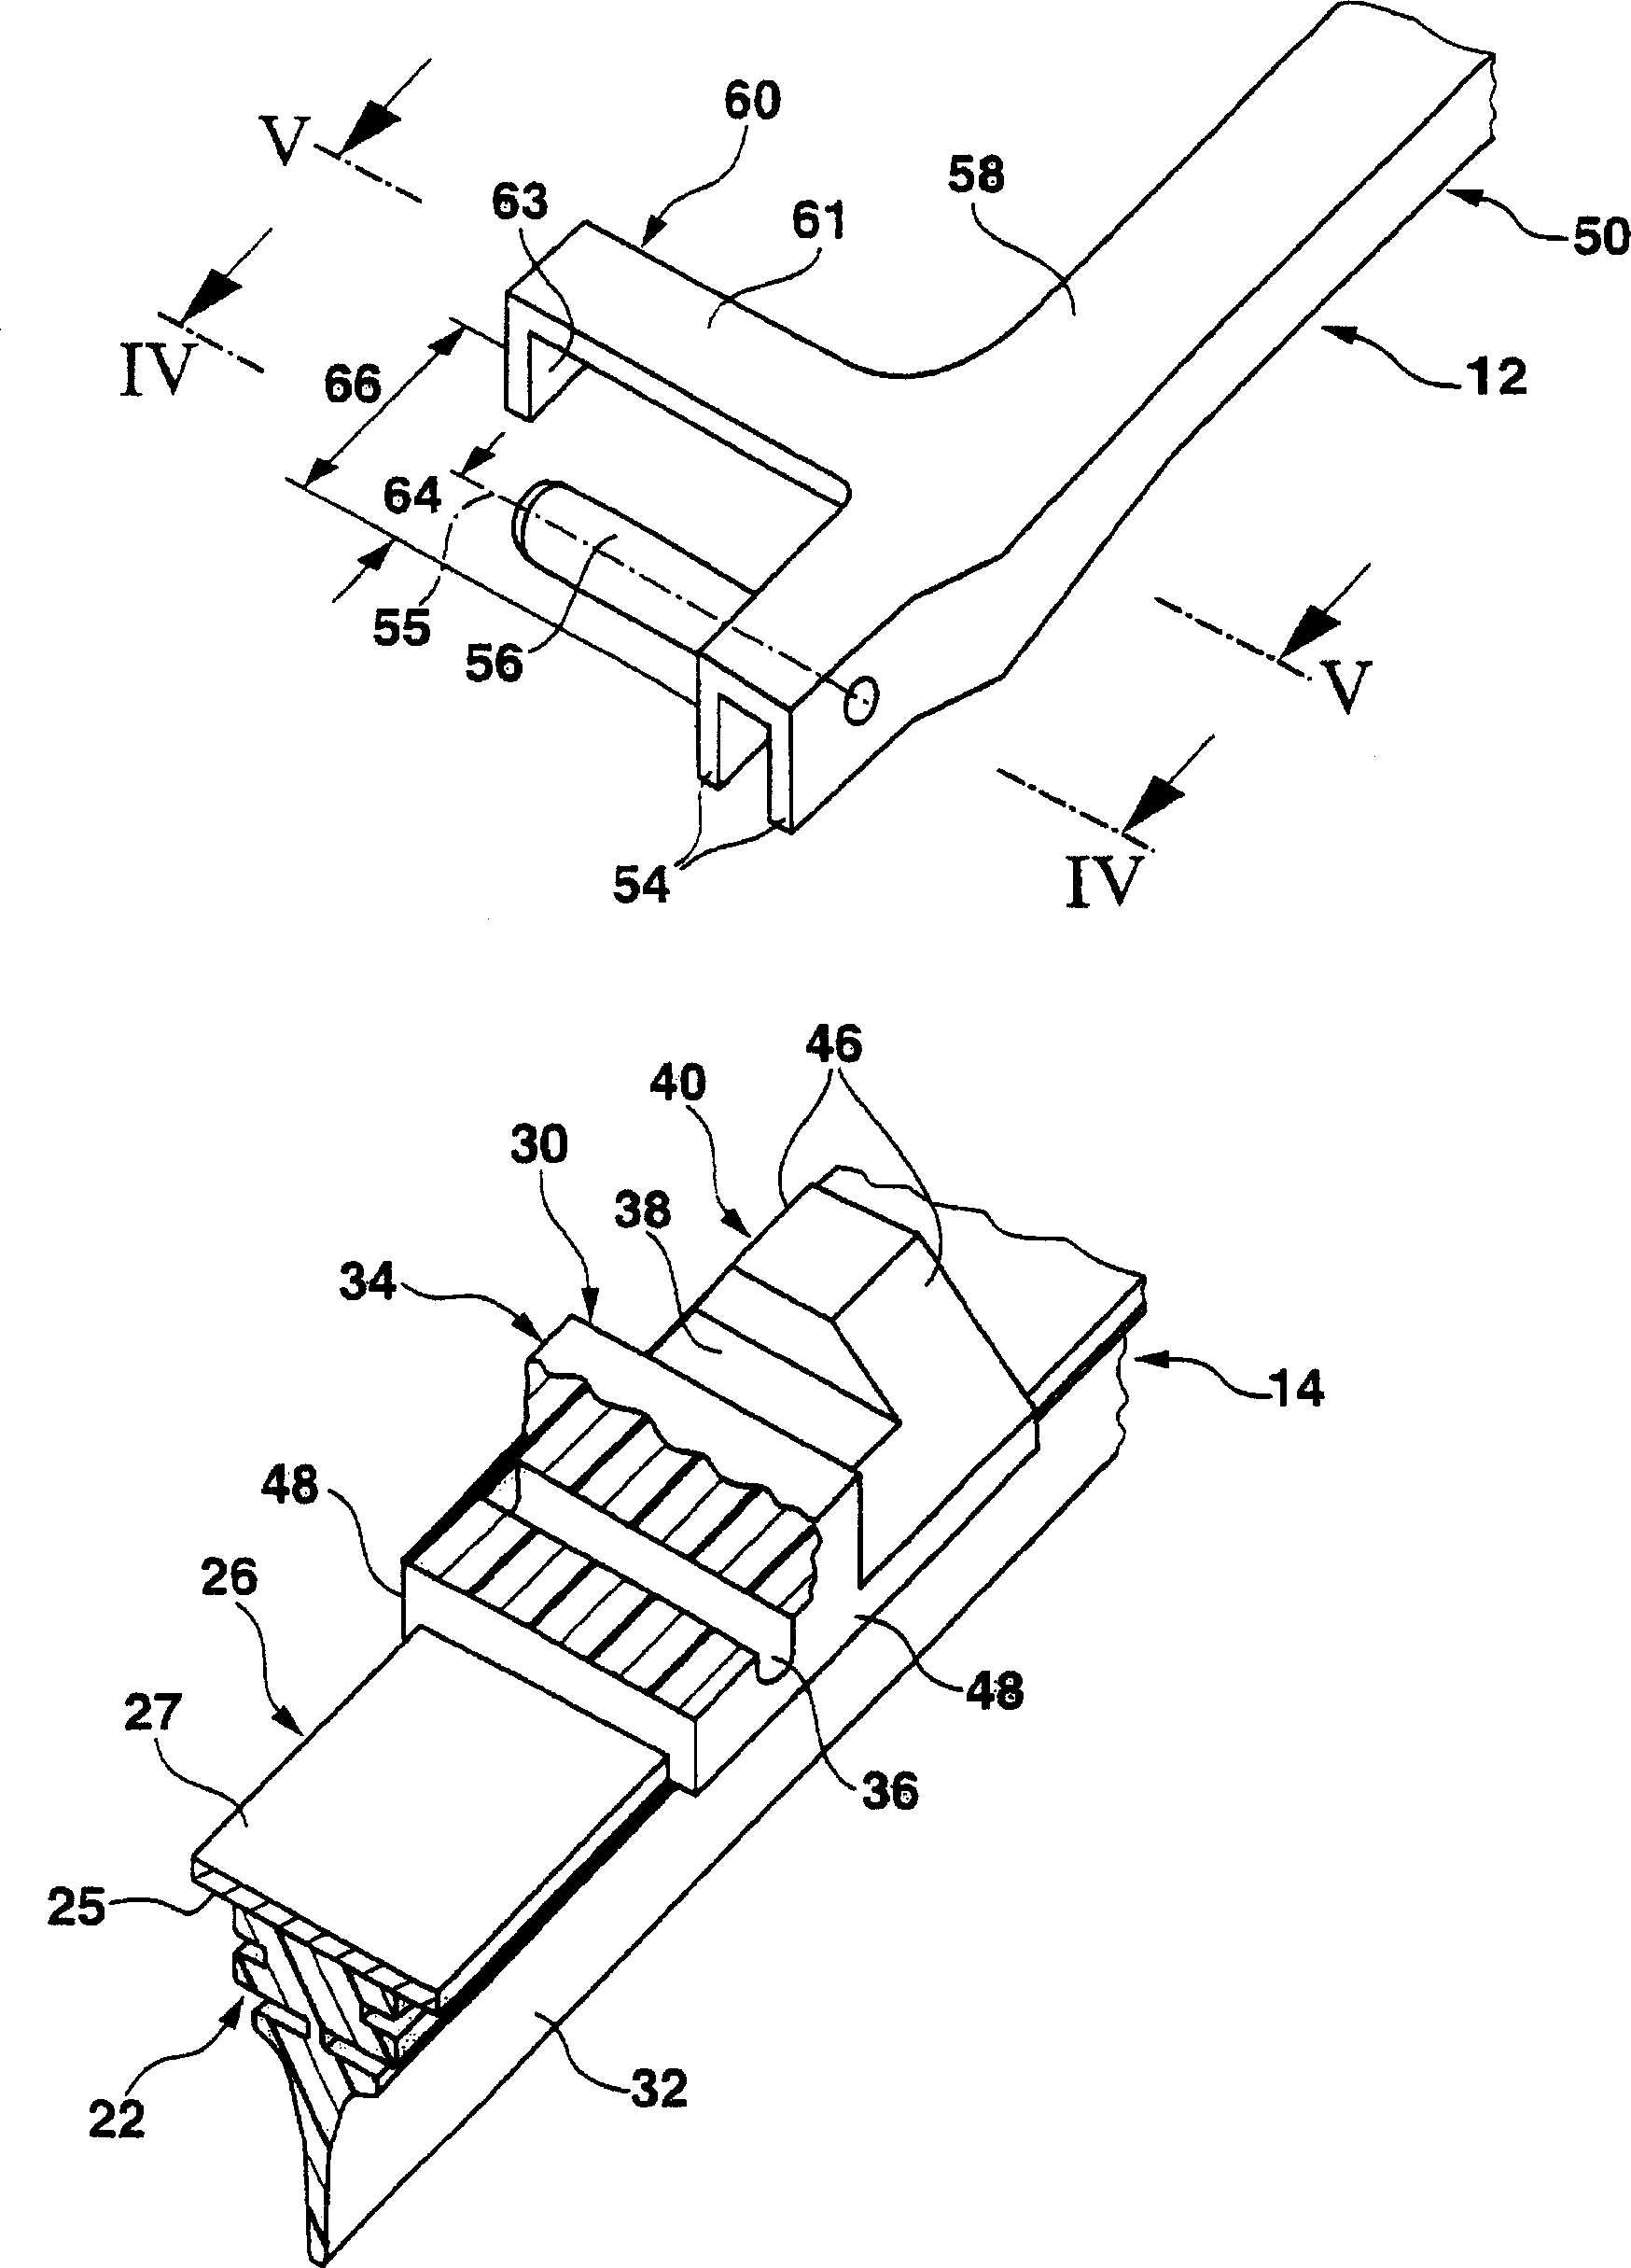 Wiper device for motor vehicle windows